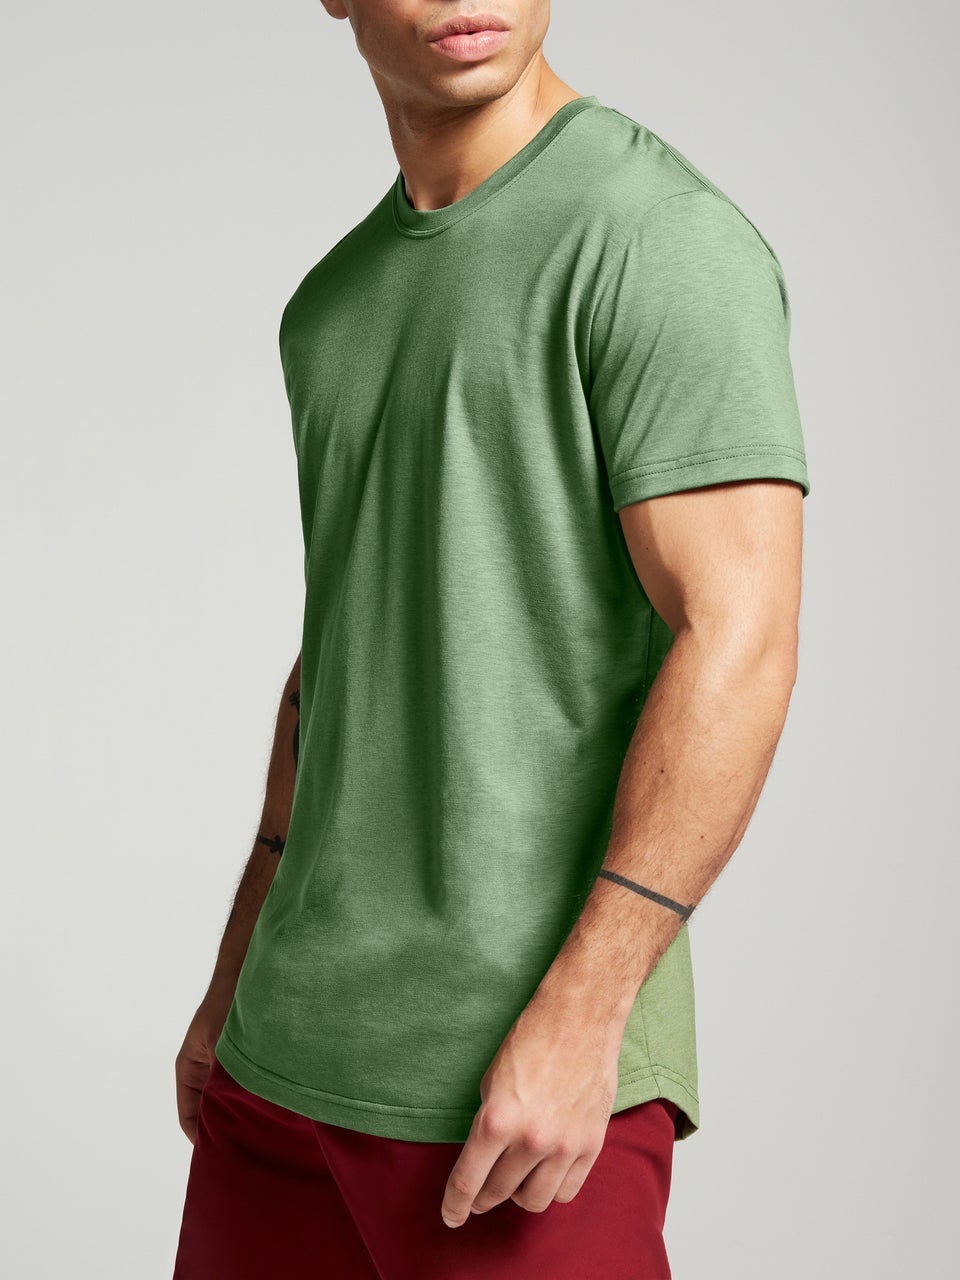 'The Actor' T-shirt - Green